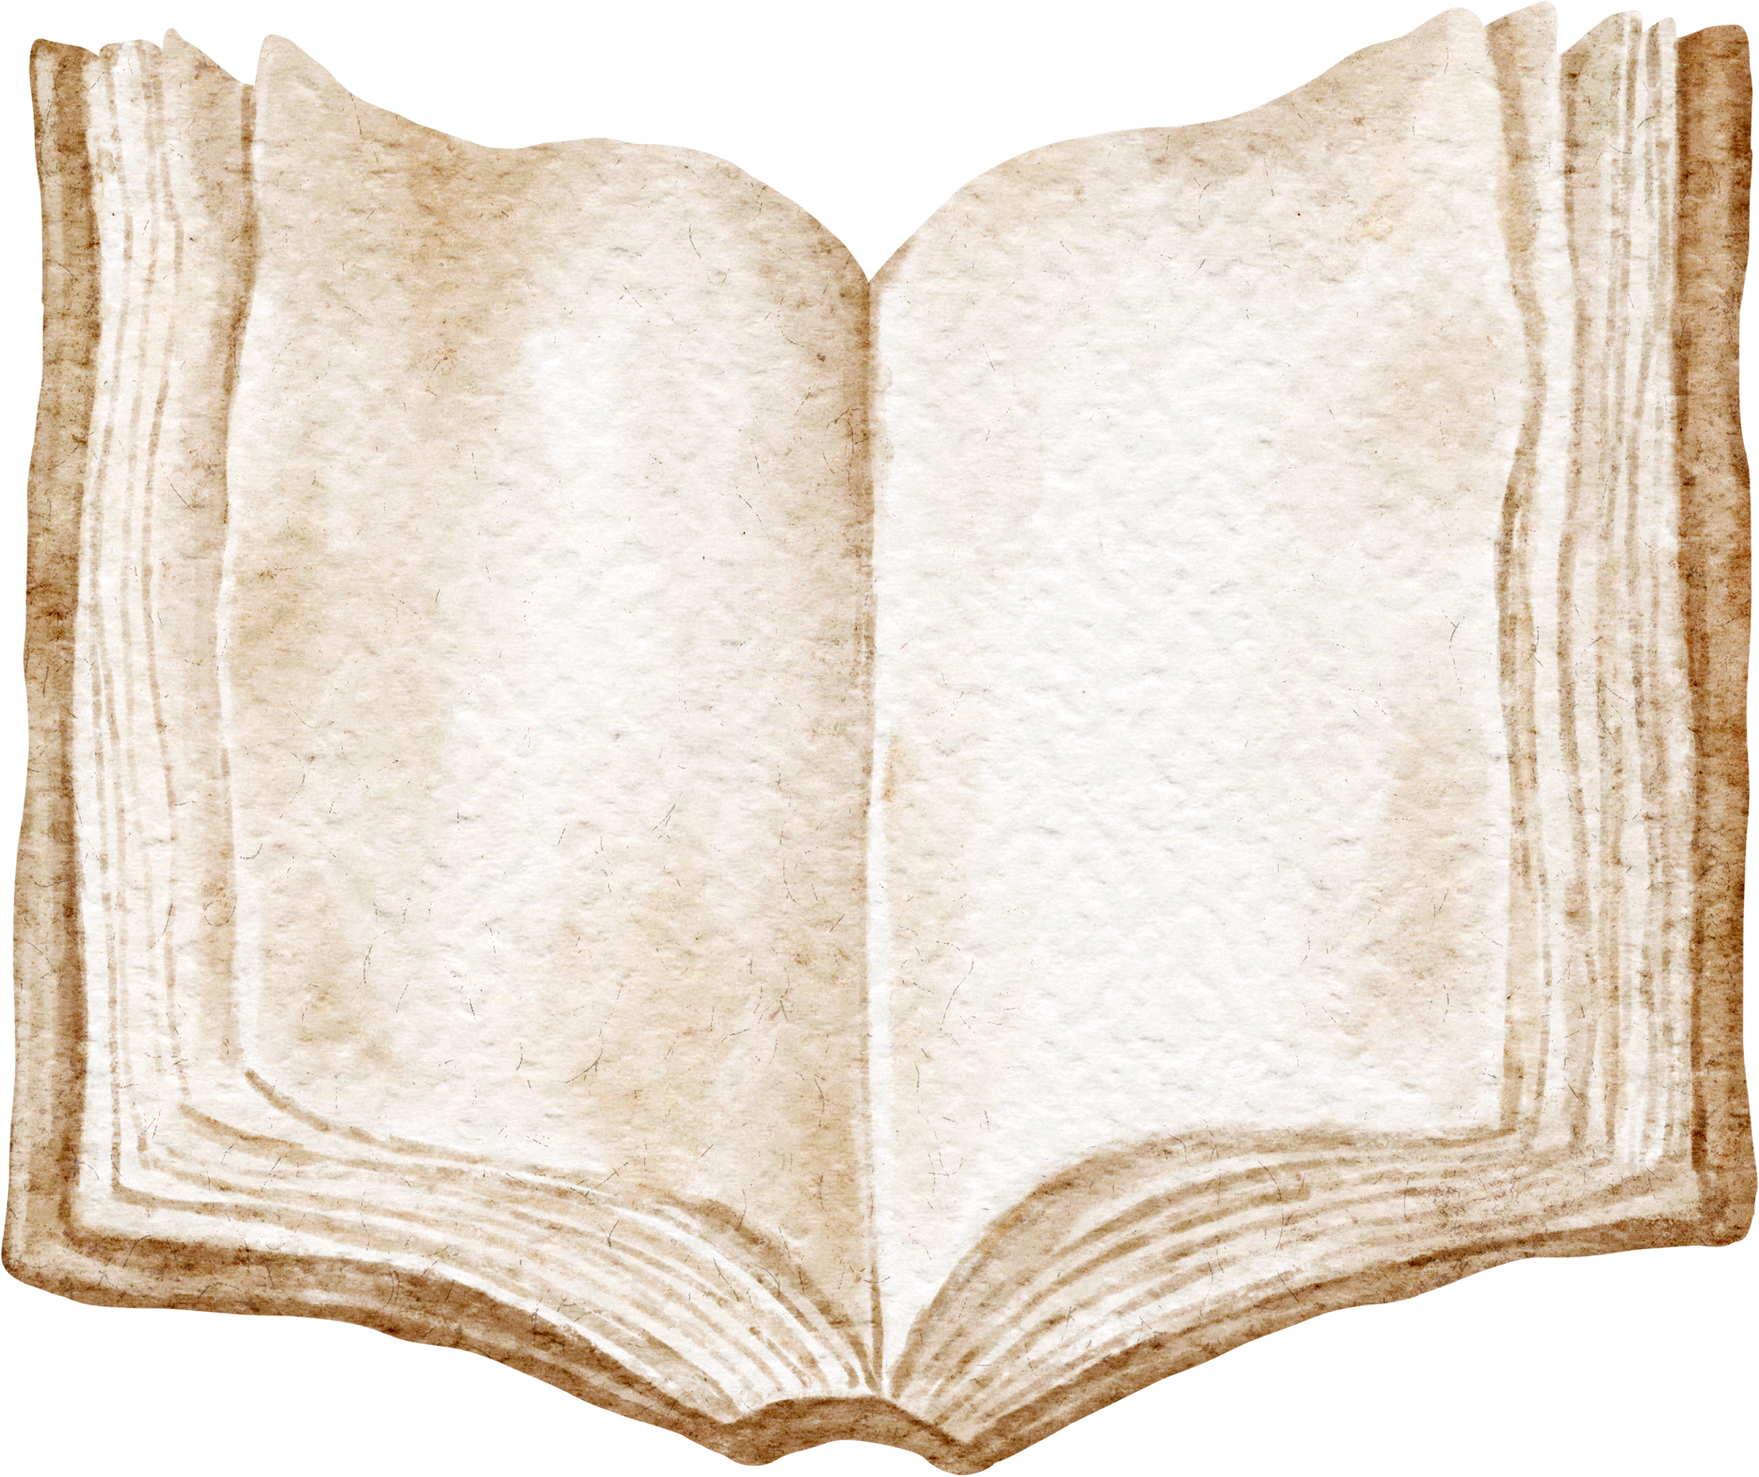 Opened book hand drawn clipart